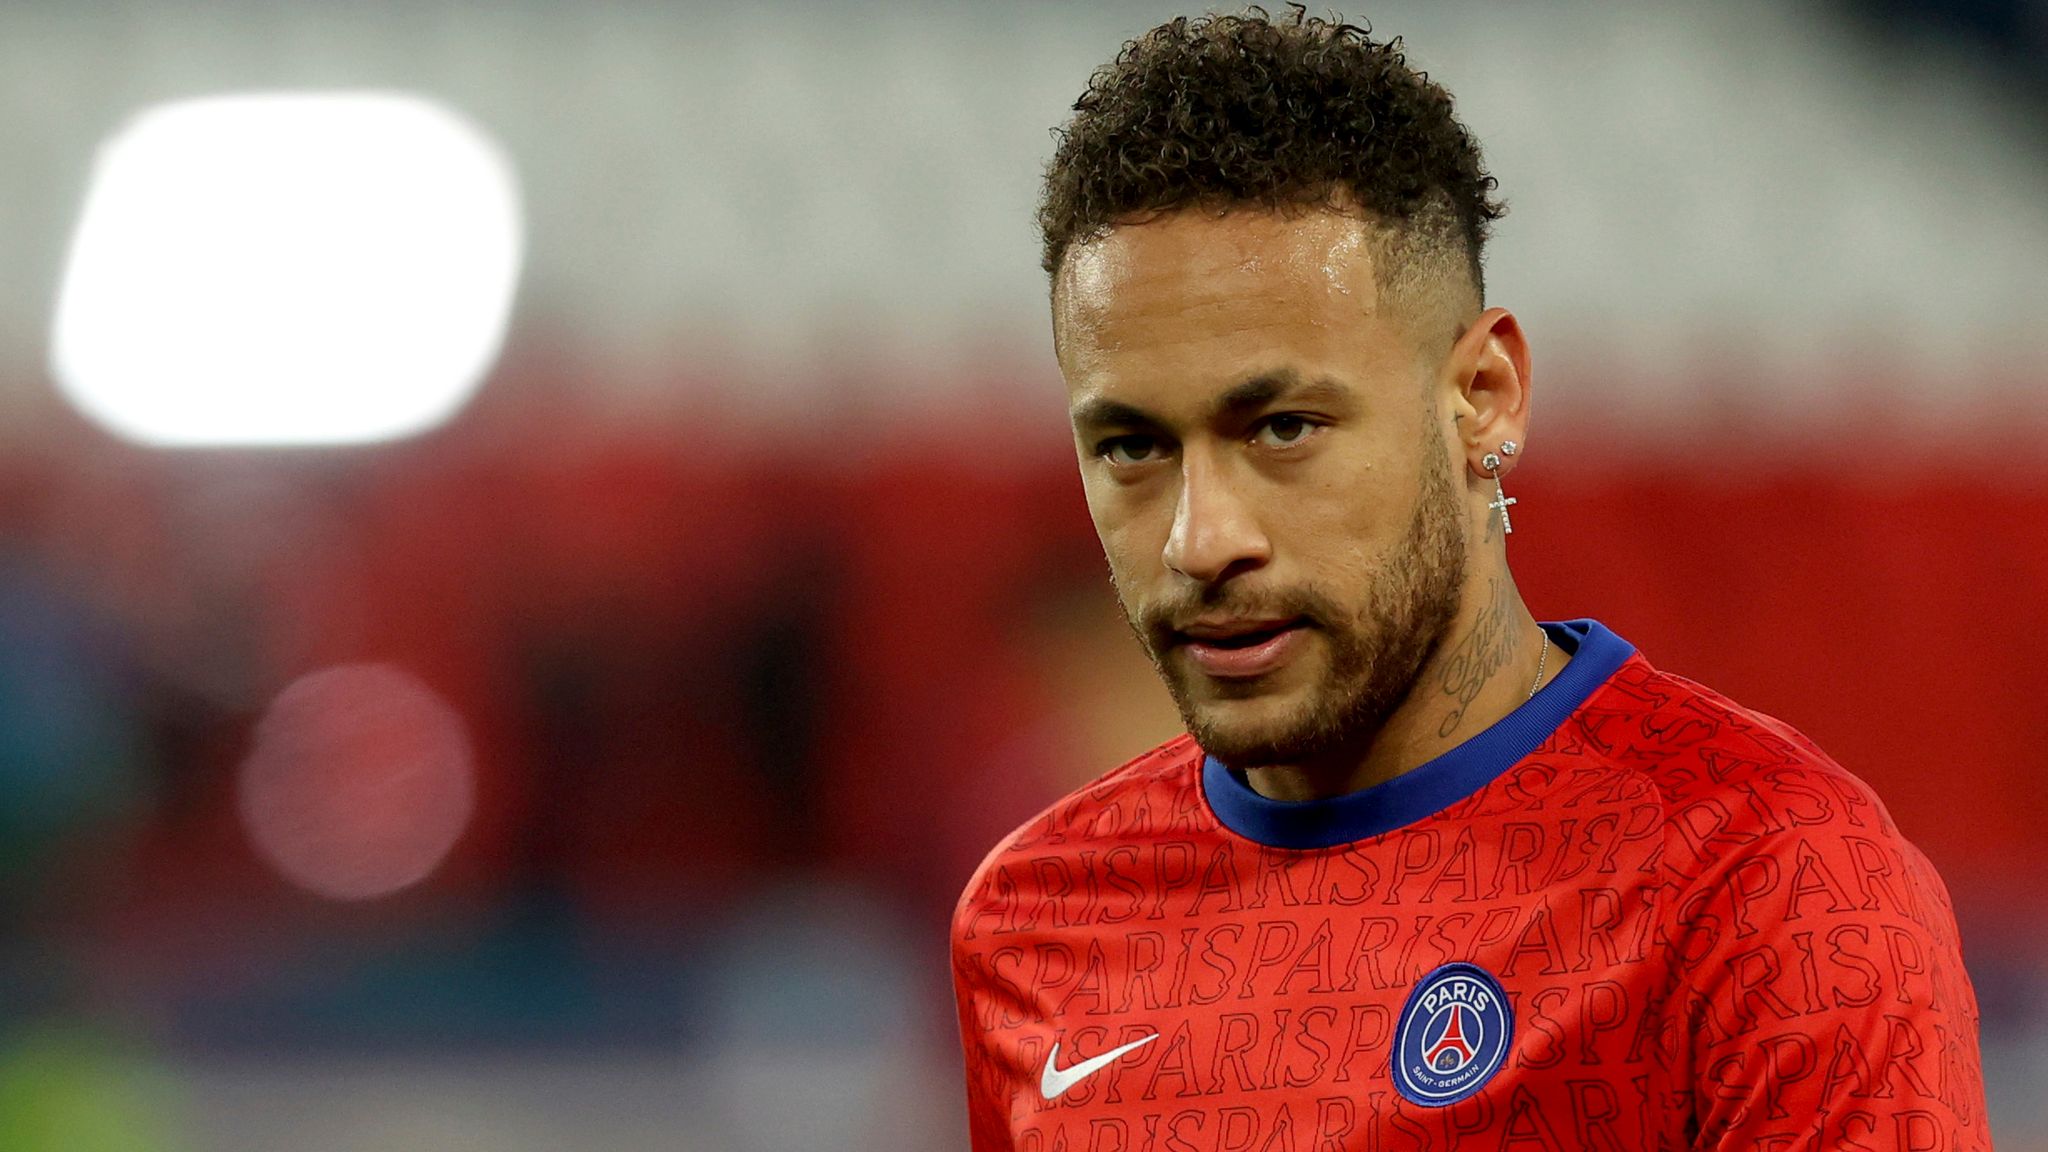 Nike says it dropped PSG forward after he refused to cooperate in investigation | Football News | Sky